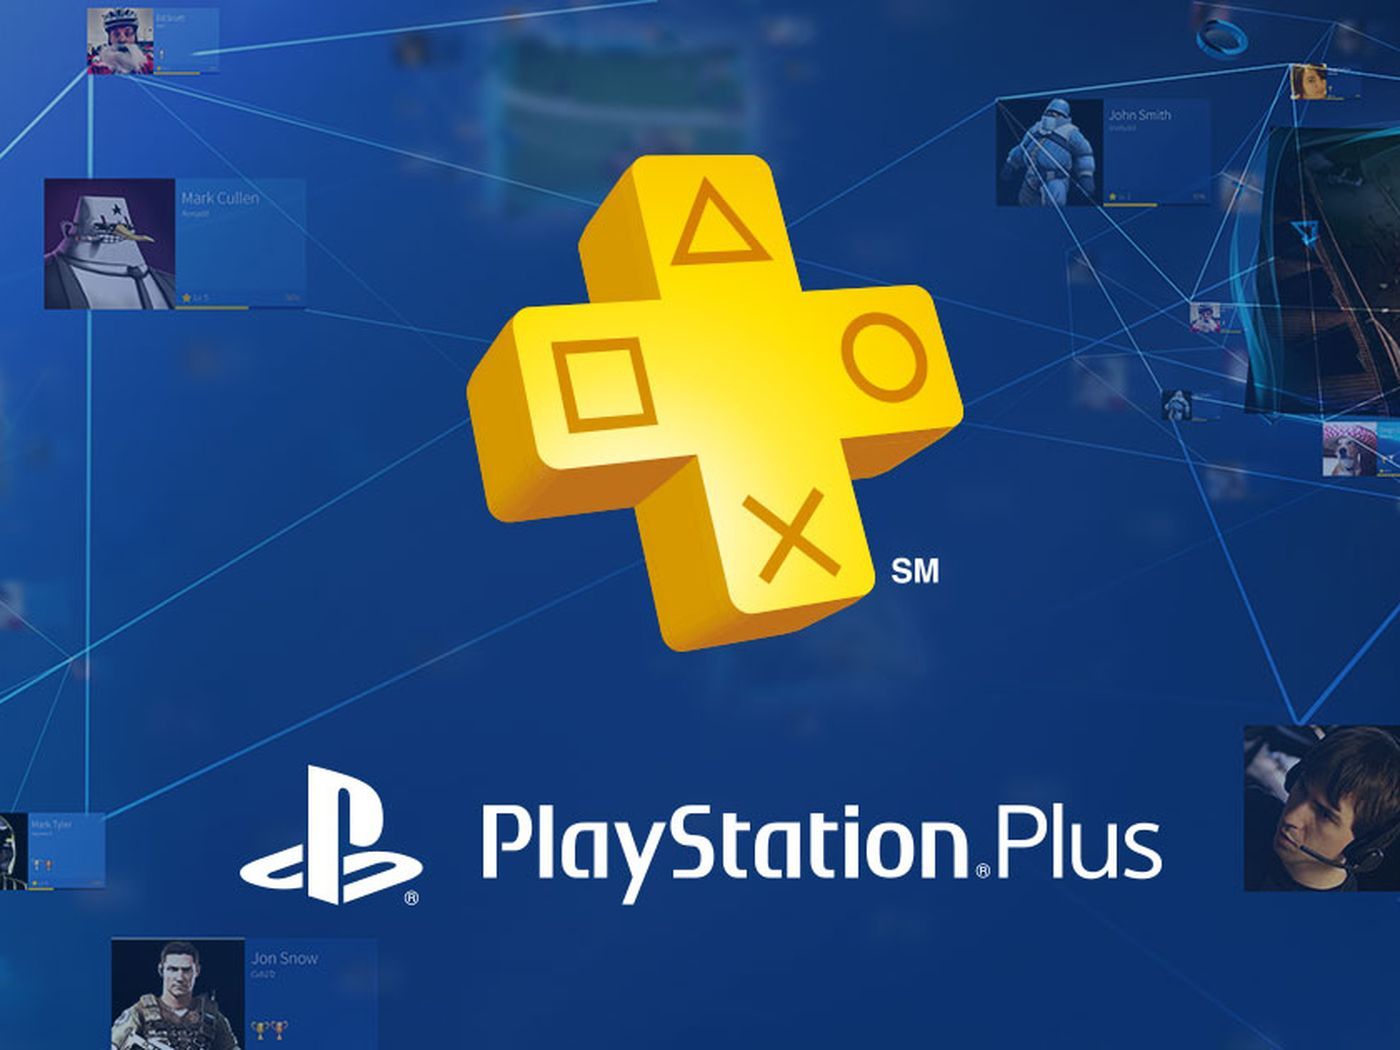 PlayStation Plus is getting rid of free PS3 and Vita games